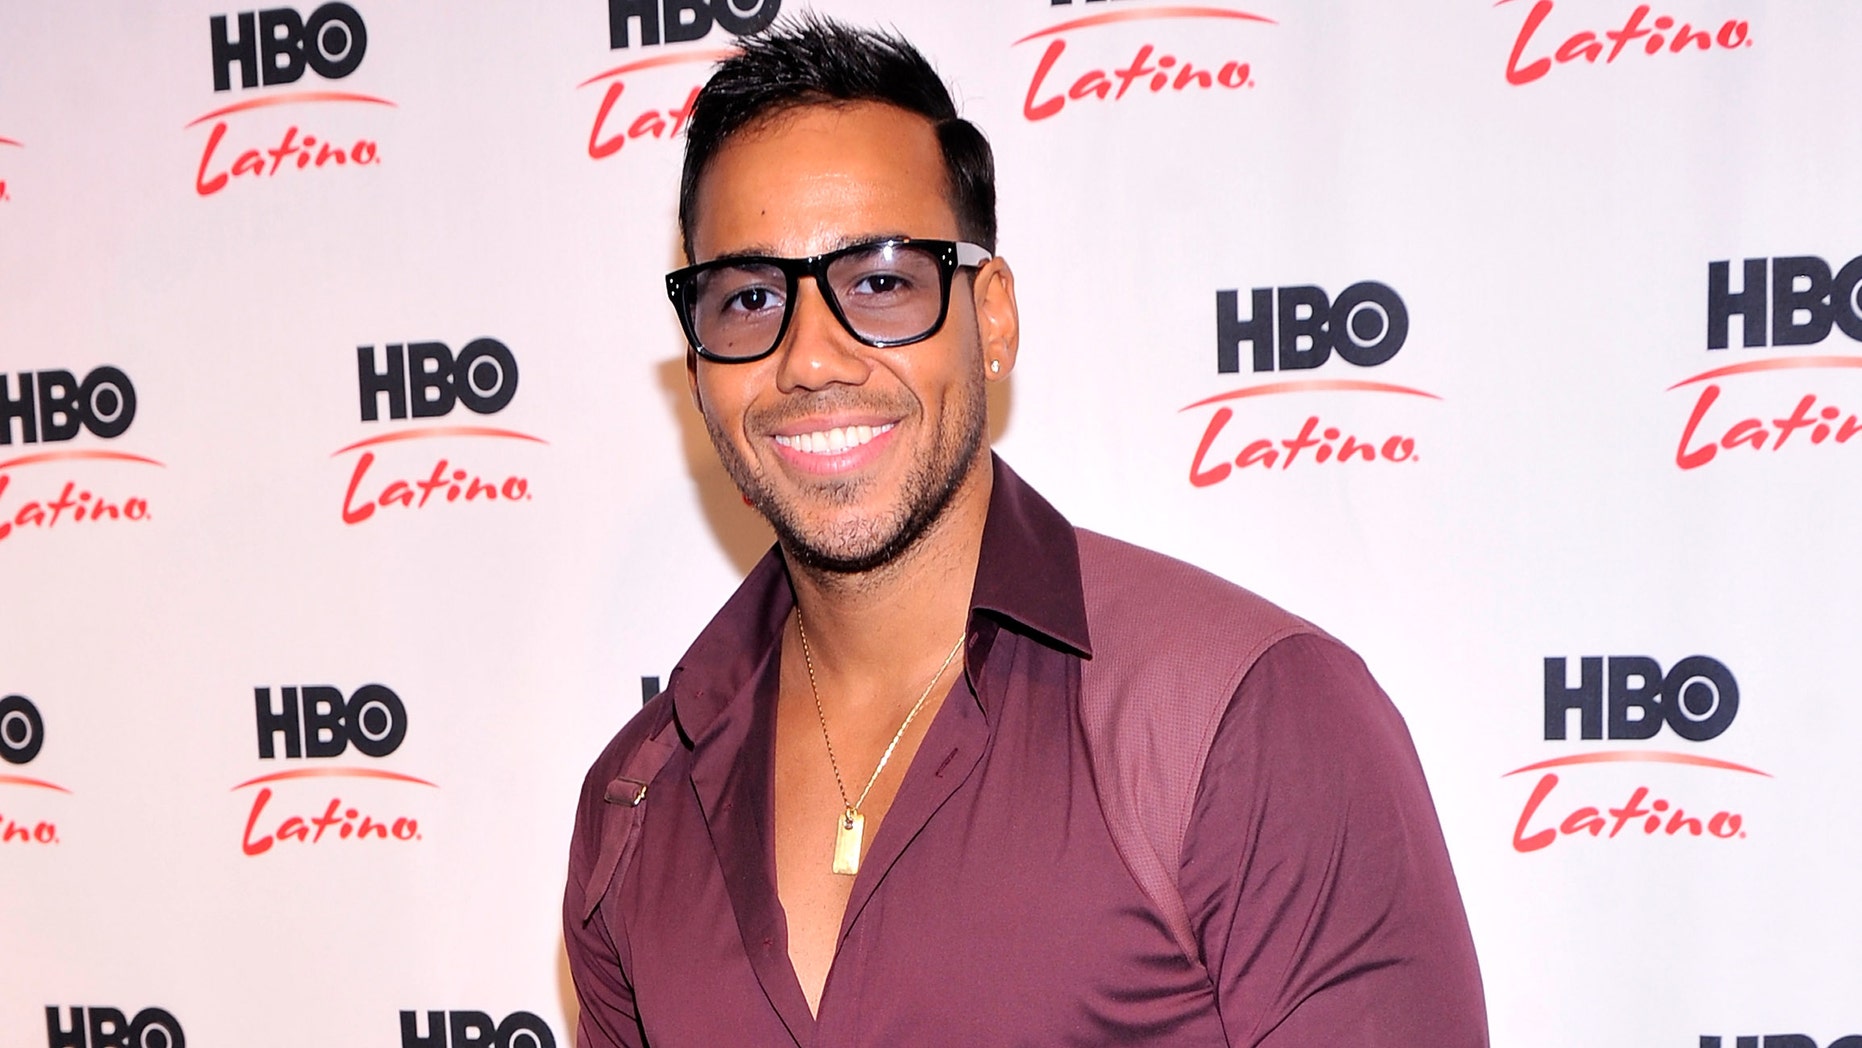 Romeo Santos Opens Up About A Dad I Thought I Wasn't Ready